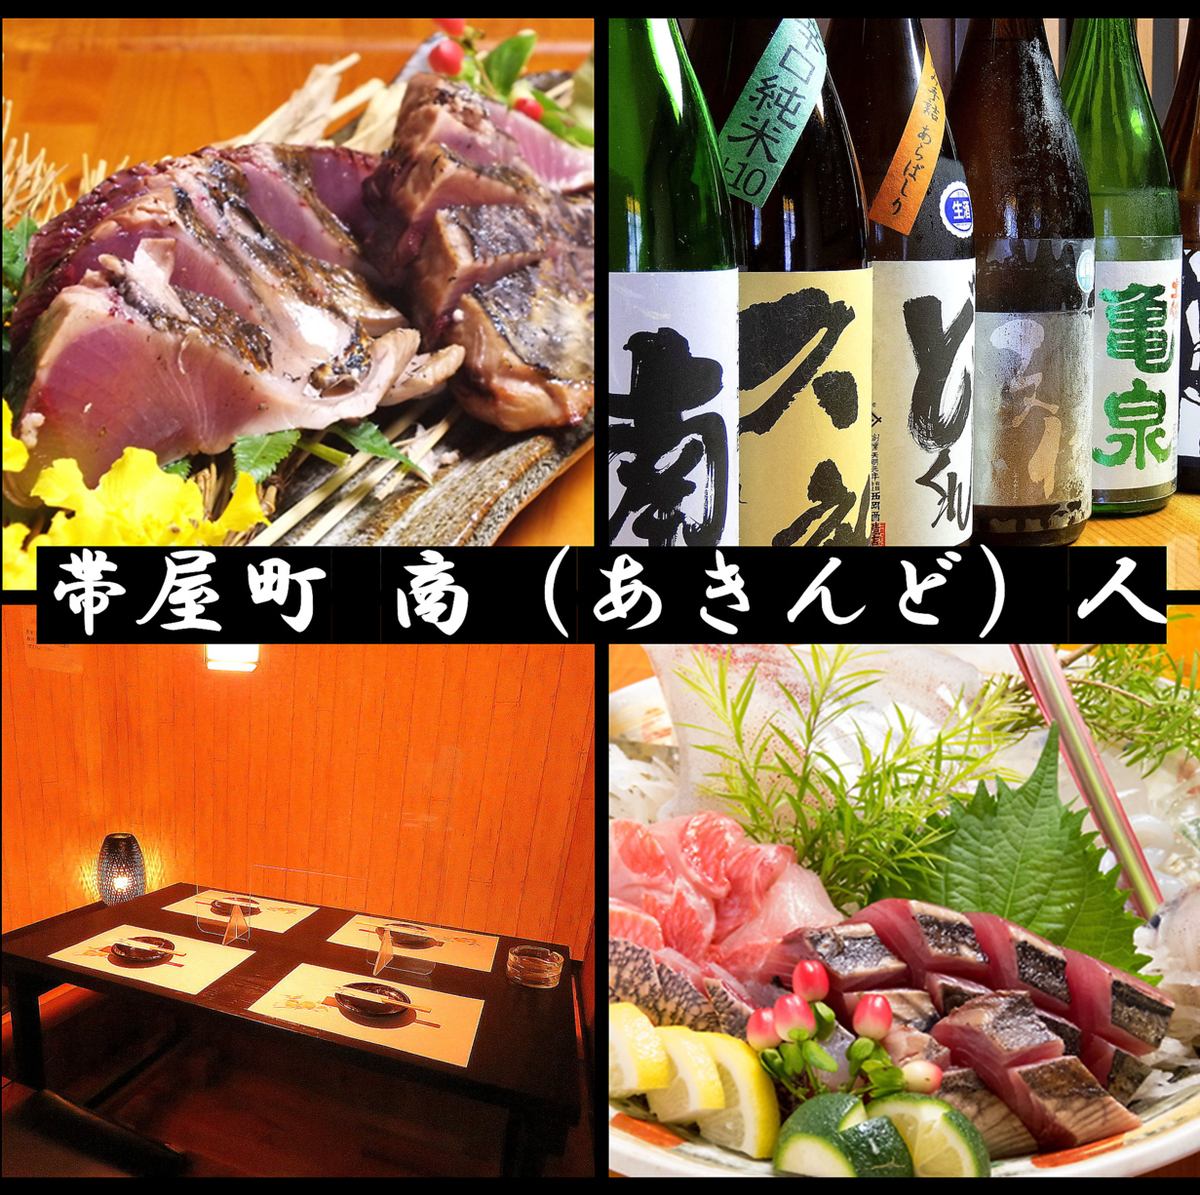 Close to Hirome Market♪ A new banquet hall where you can enjoy seasonal dishes and sake◎If you come to Kochi, become a merchant!